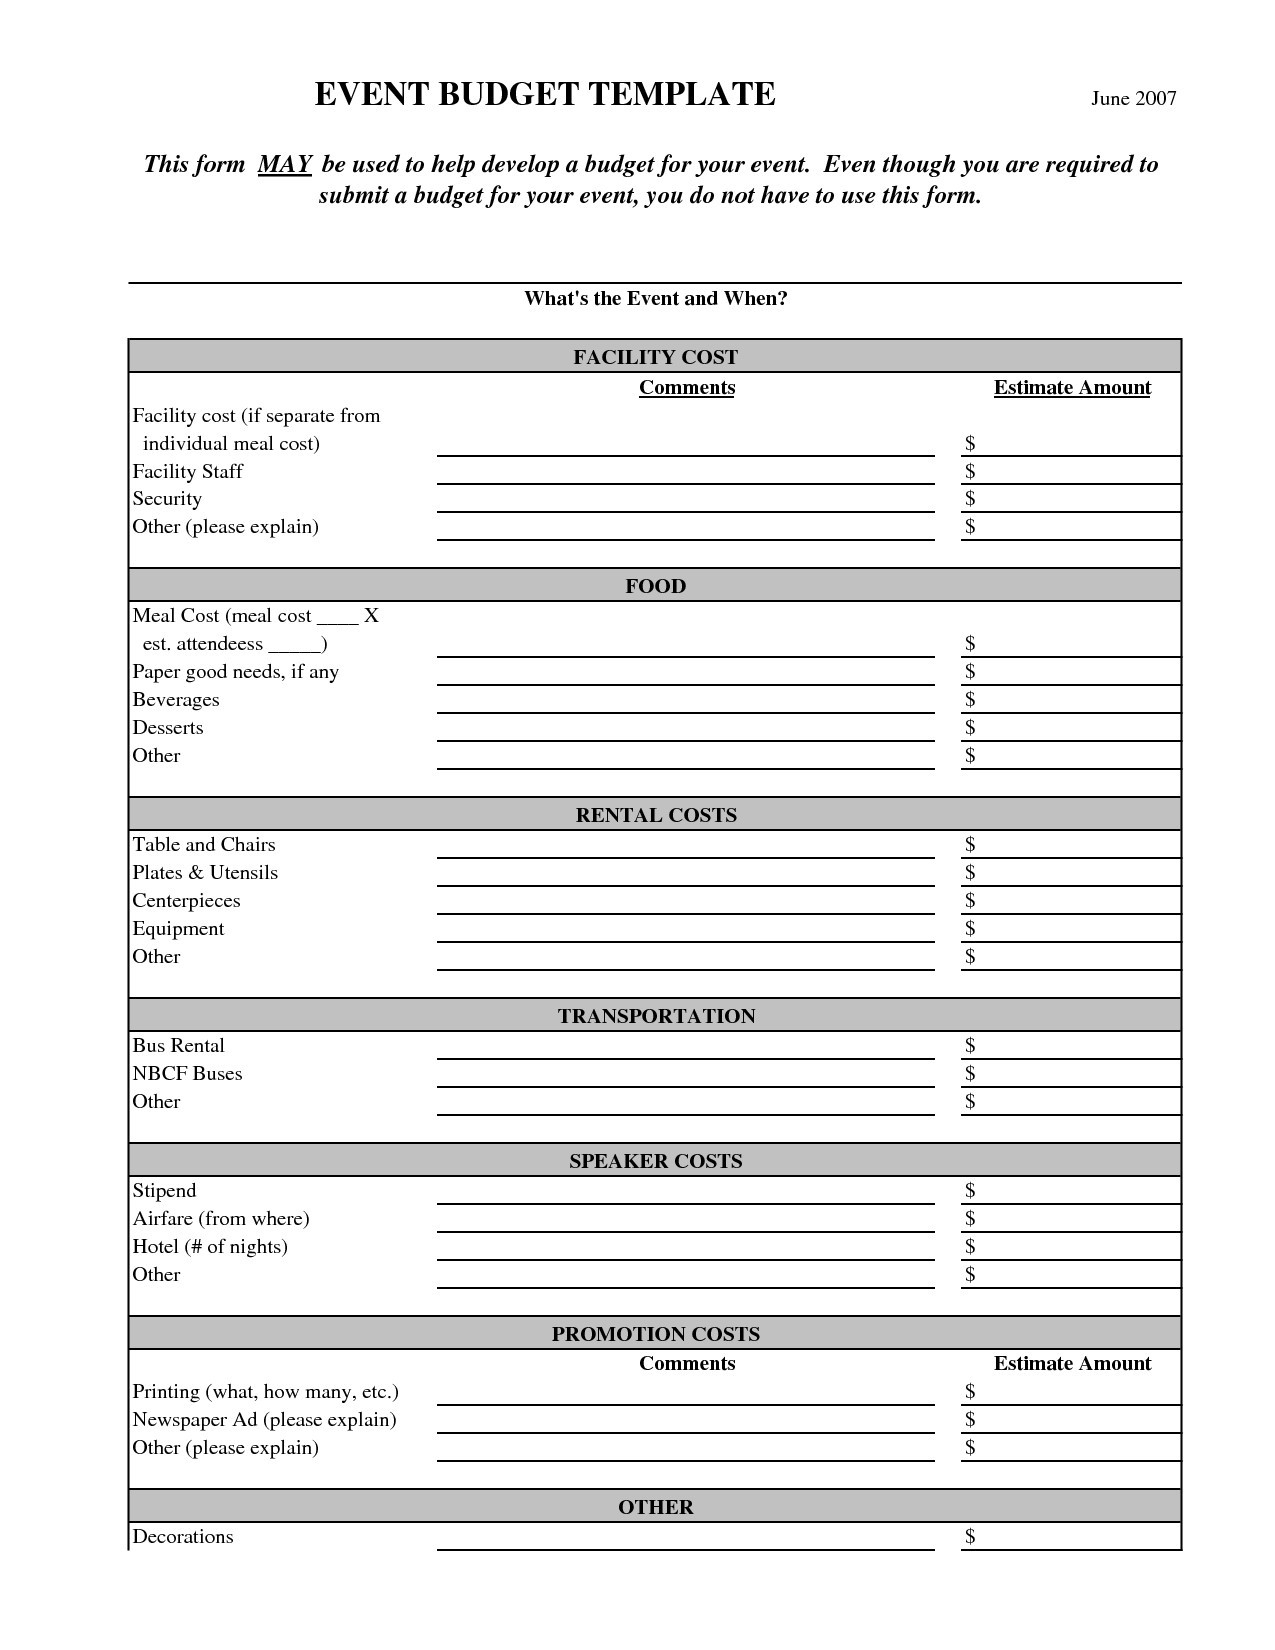 Event Planning Spreadsheet Inside Event Planning Spreadsheet Awesome Banquet Hall Business Plan For